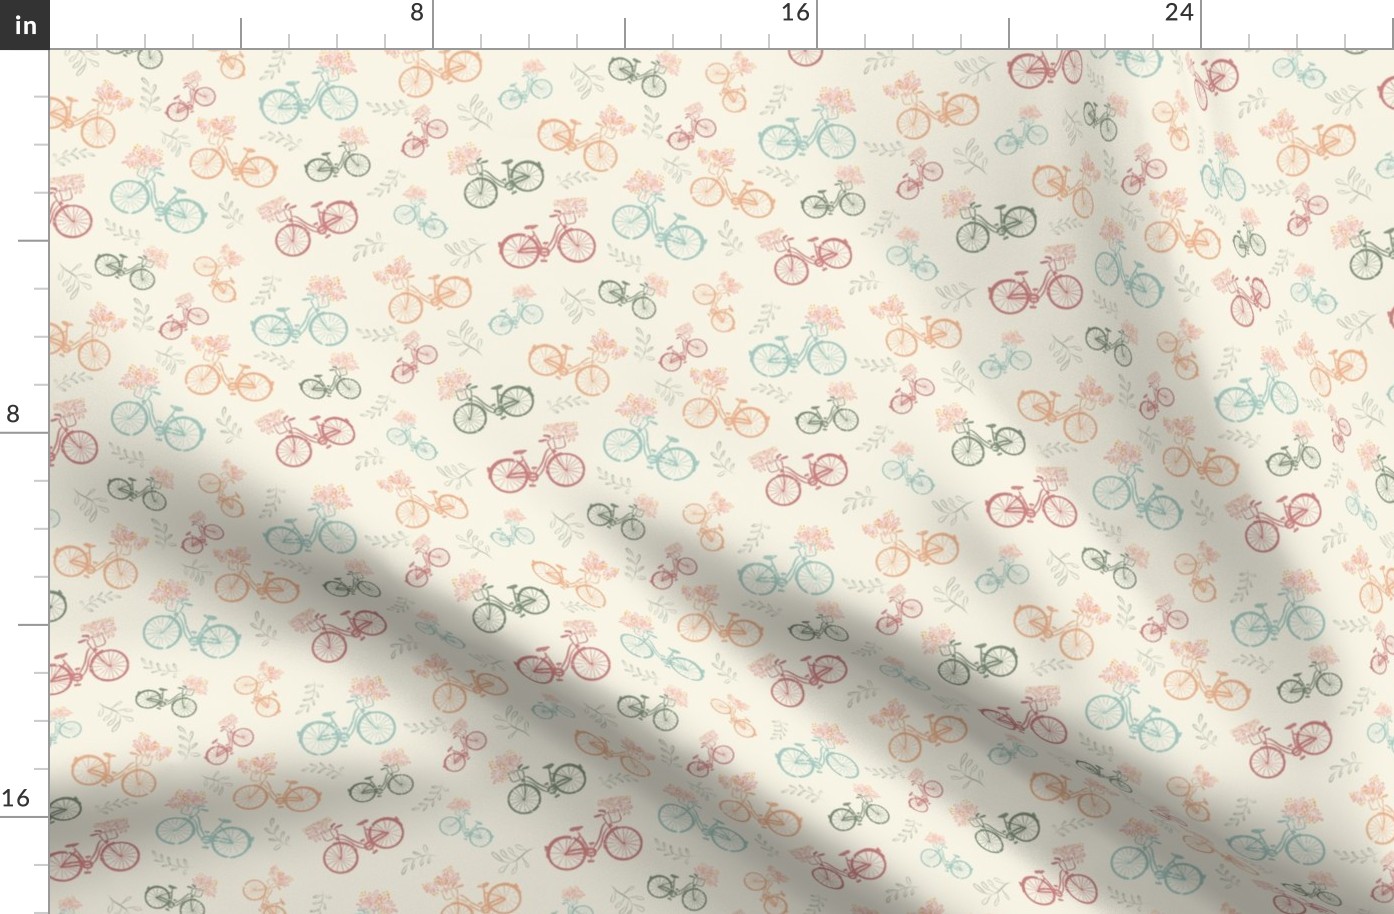 Vintage bicycle on cream, bicycle fabric, kids clothes fabric, nursery fabric, 